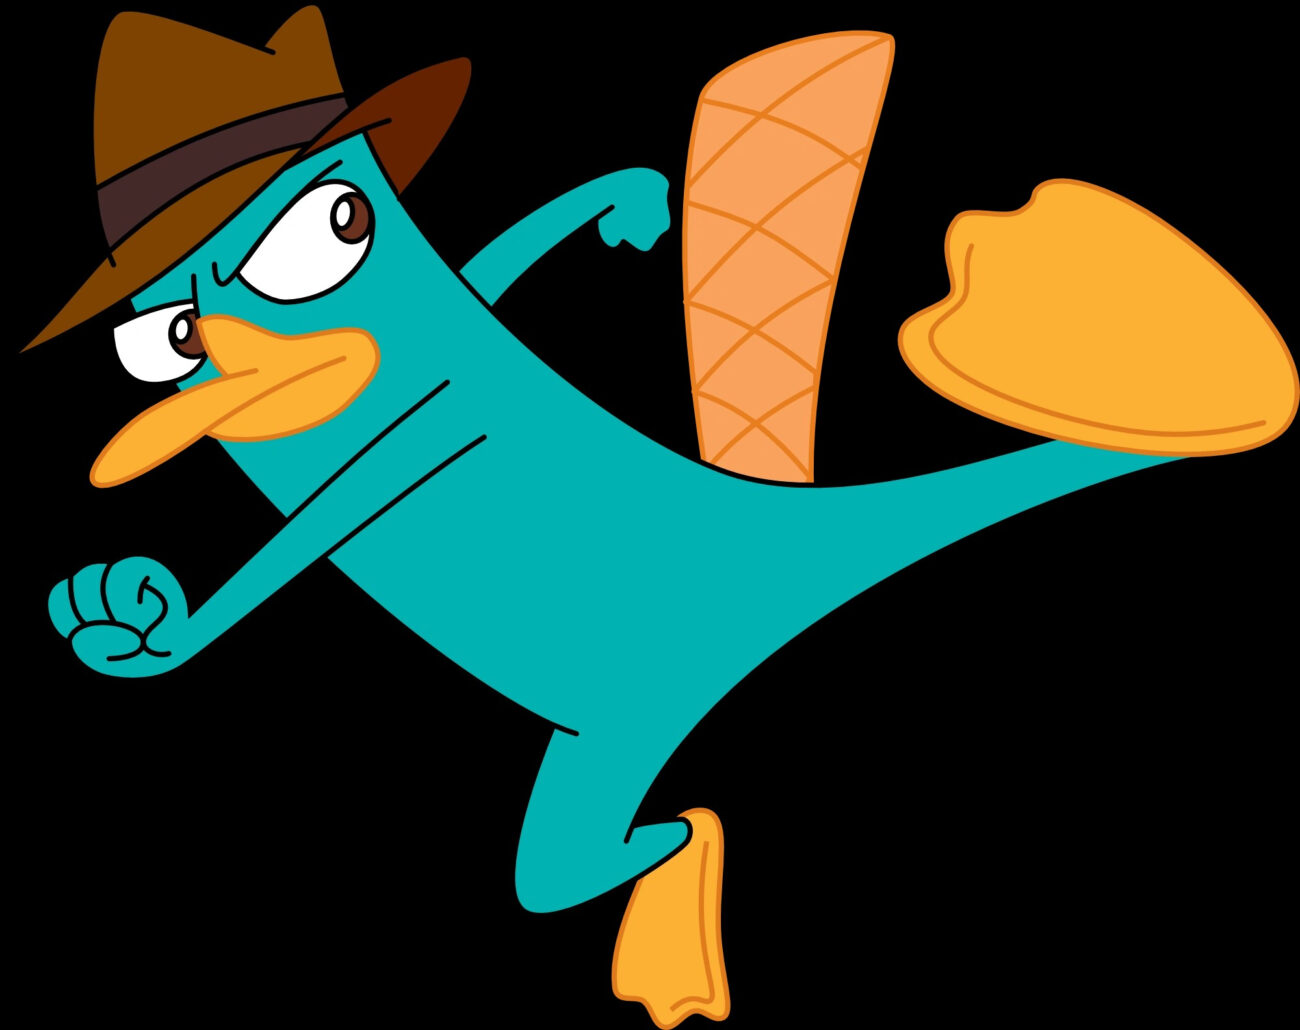 Perry the Platypus Agent P